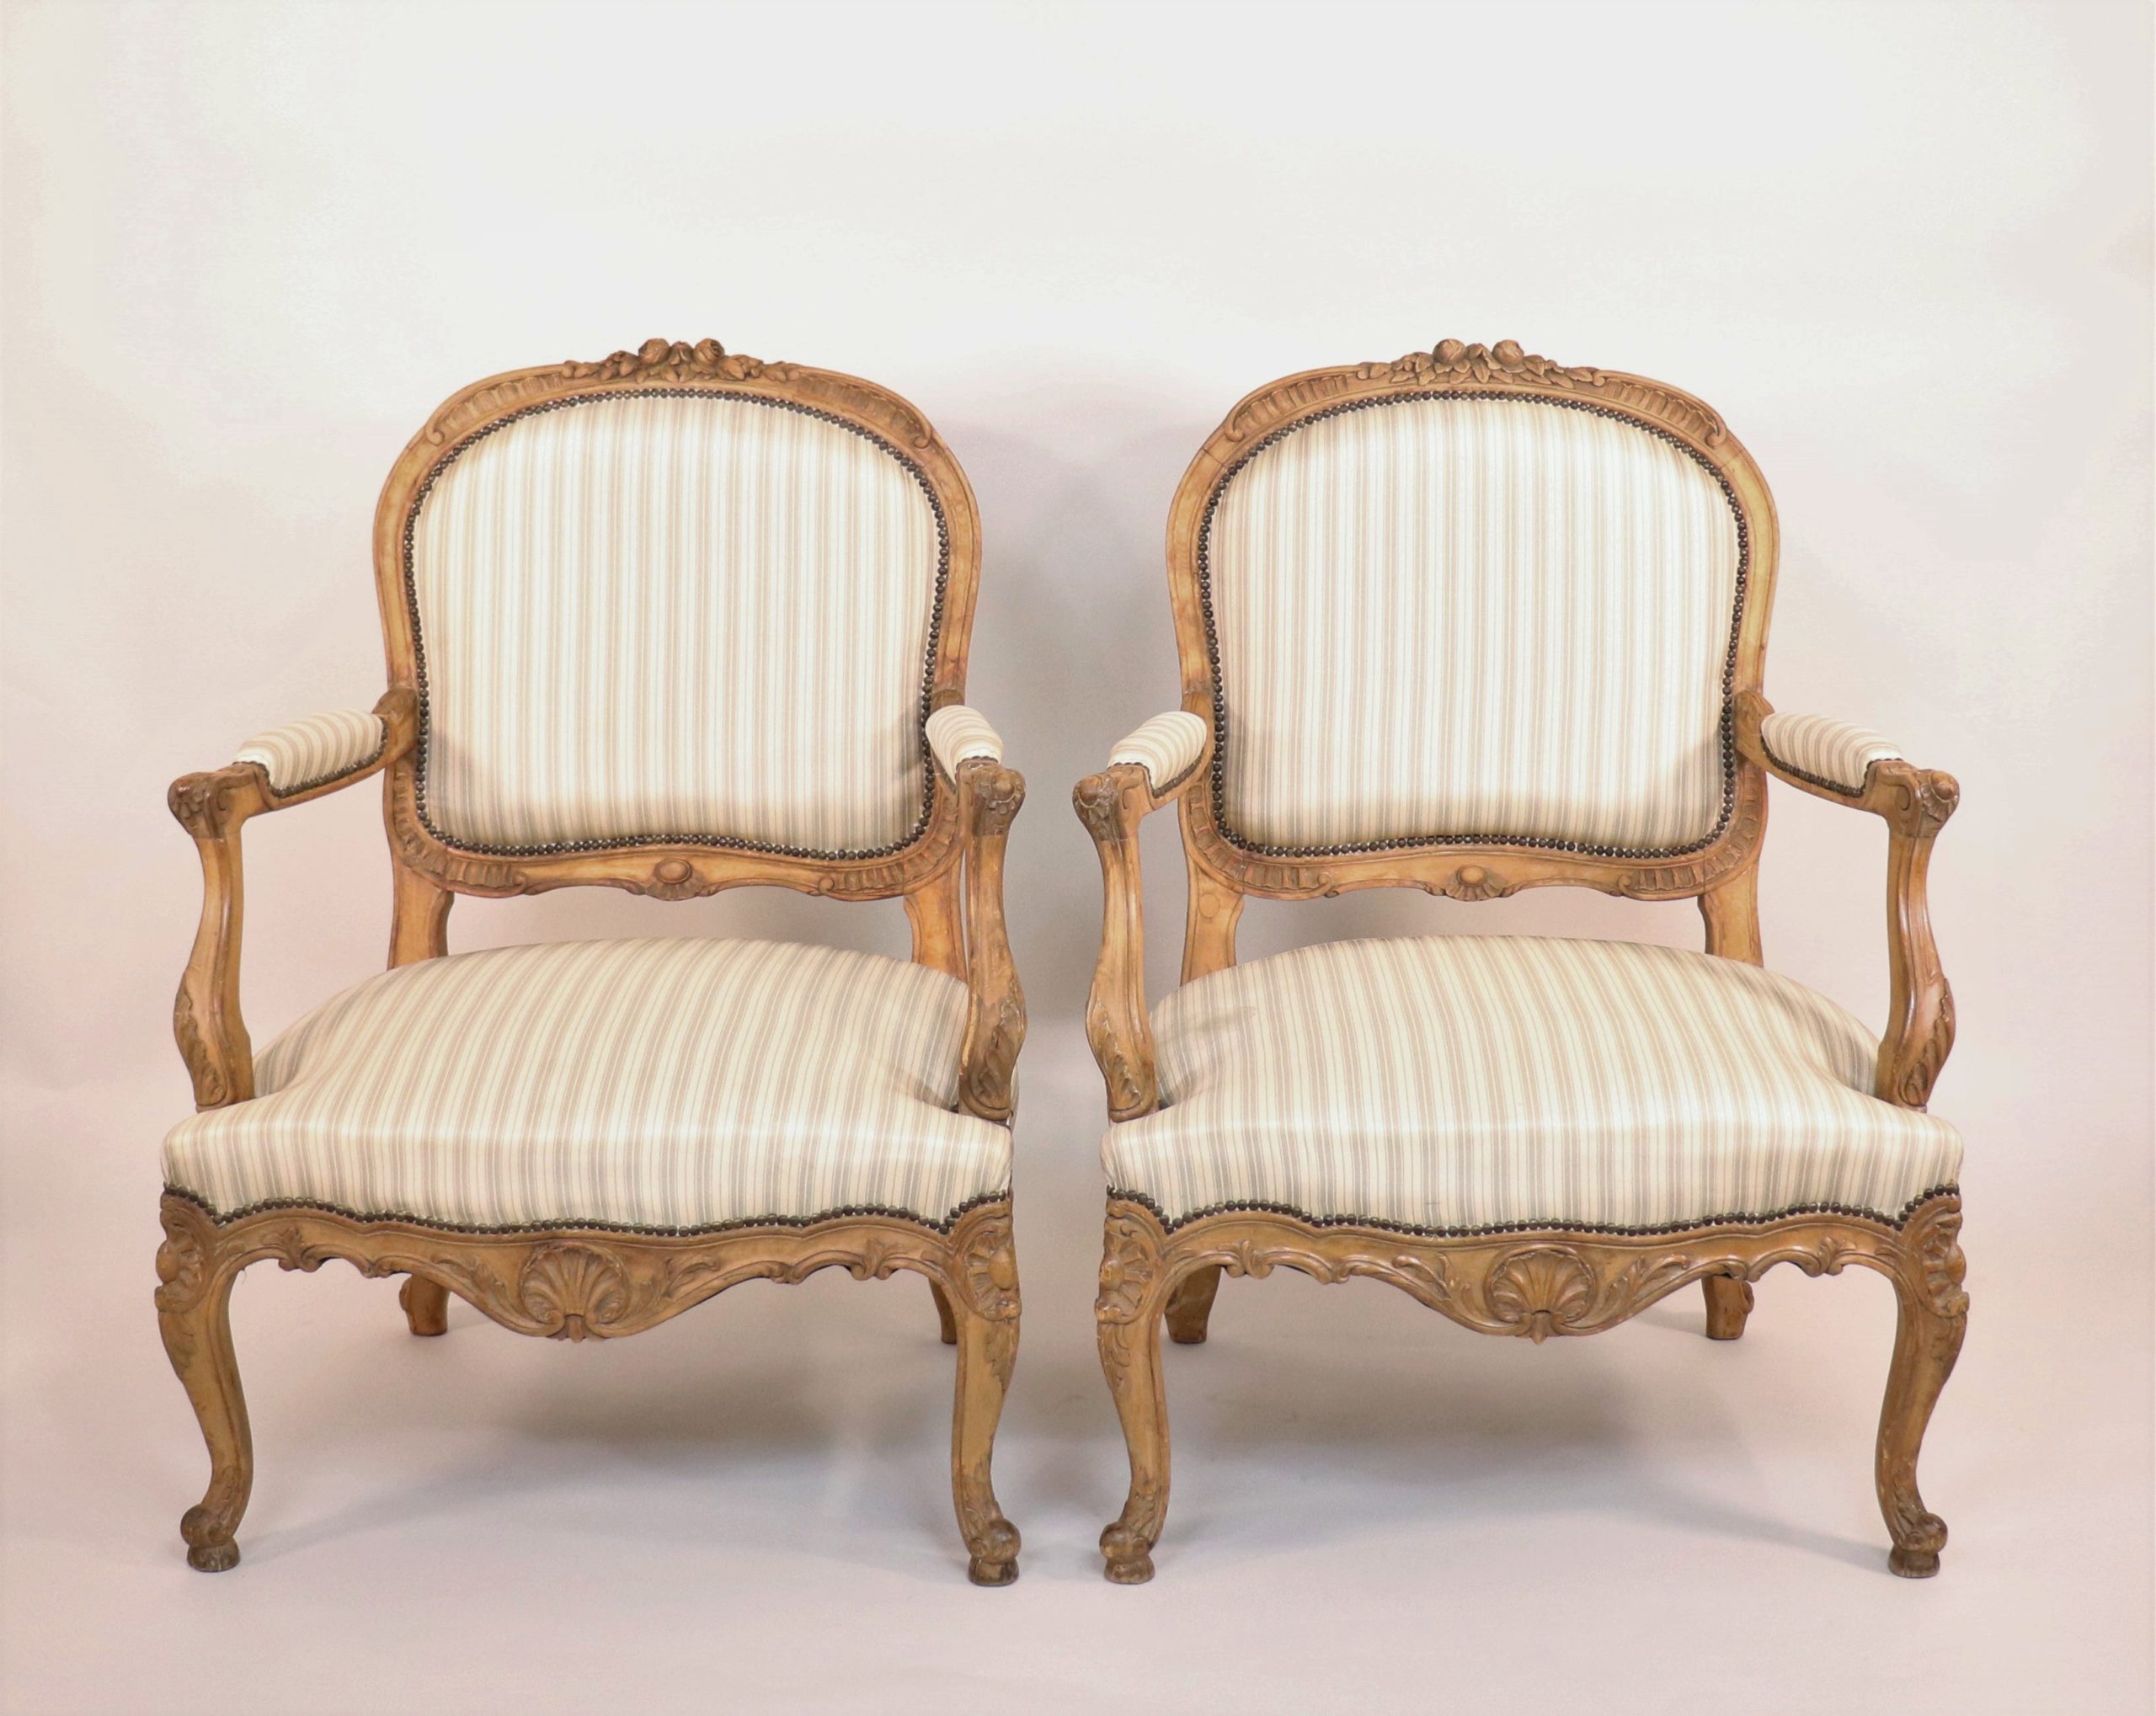 Circa 1940 French Louis XVI Style Children's Armchair Attributed to Maison  Jansen - Antiques Resources, Chicago